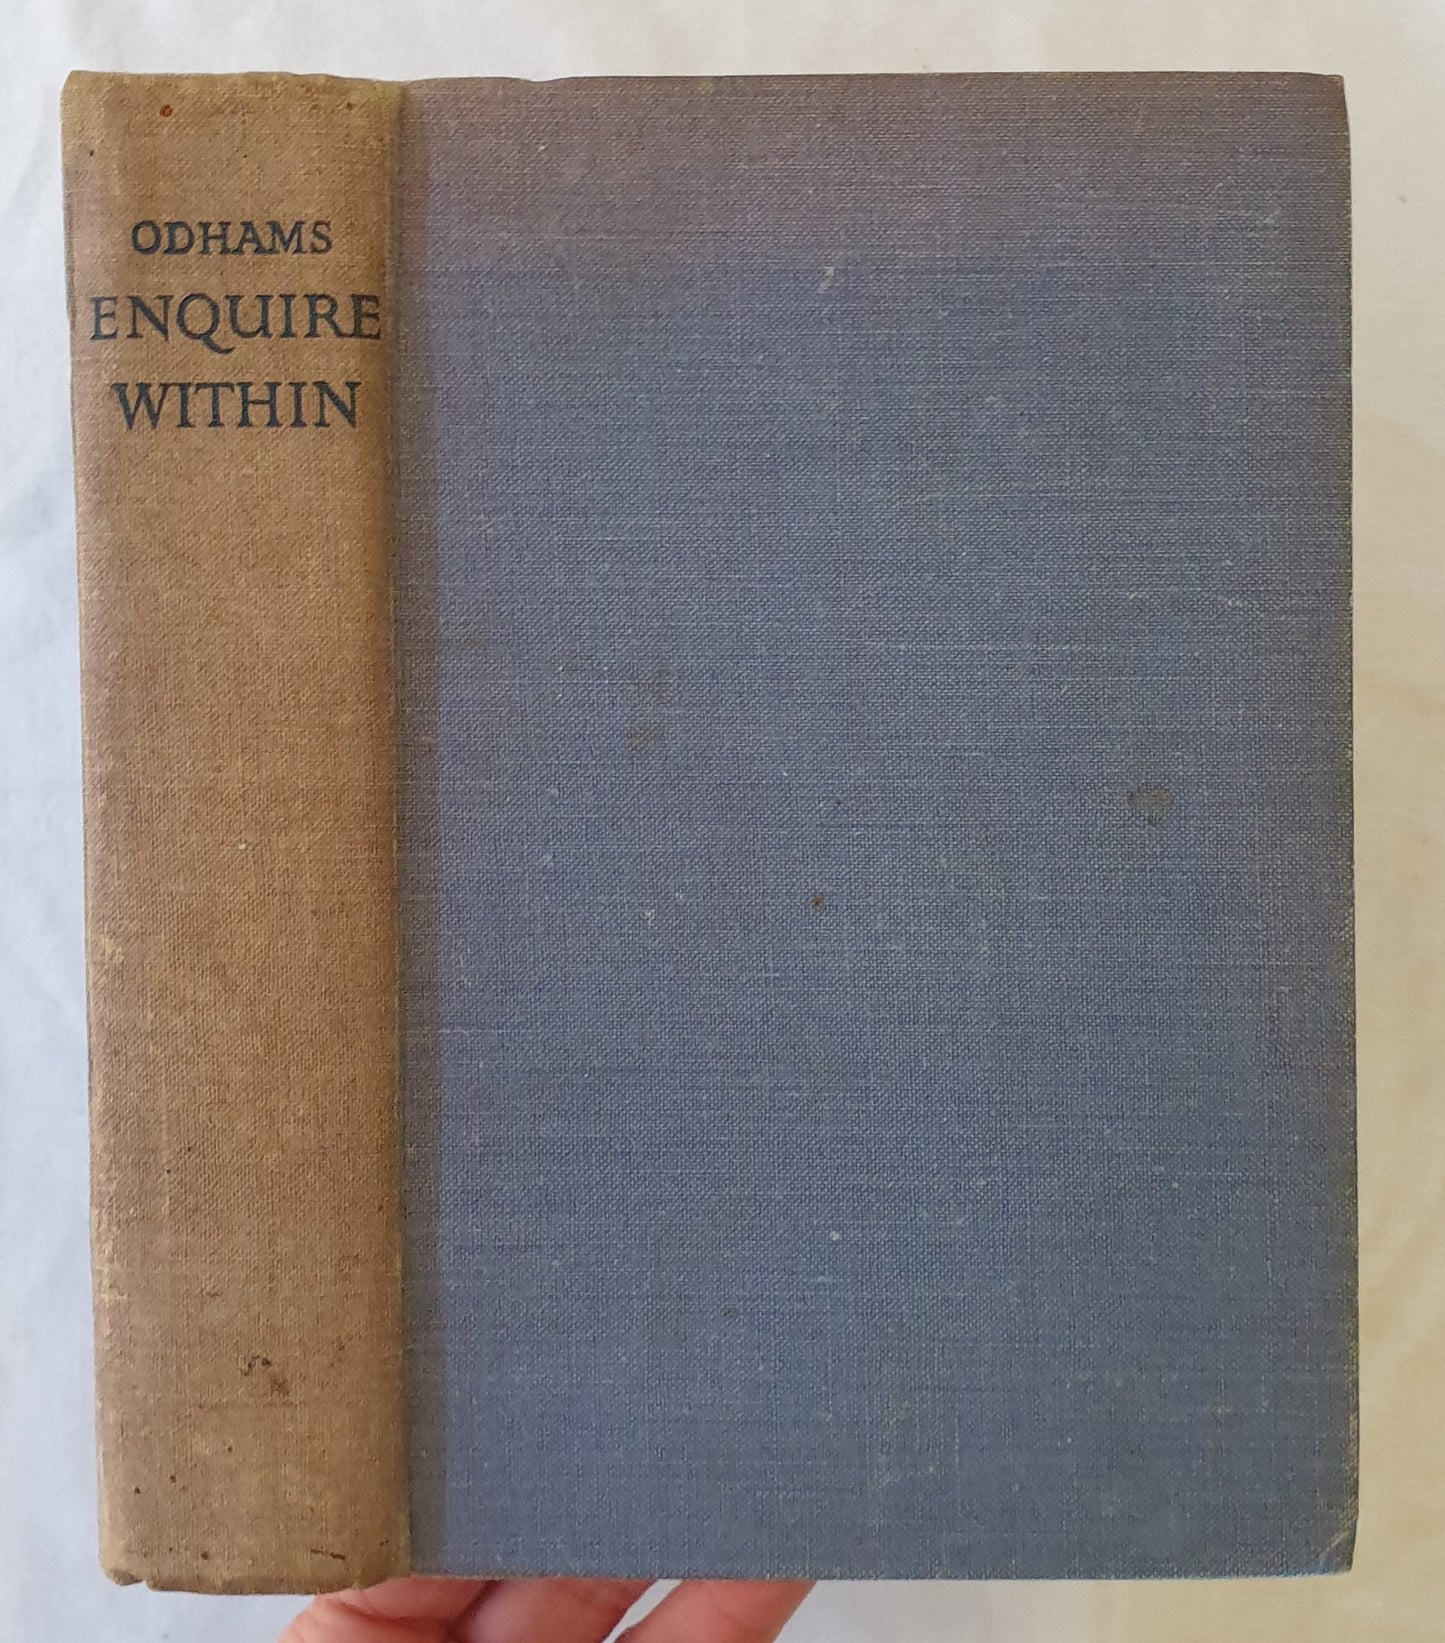 Odhams Enquire Within  A comprehensive book or reference for the home and the office